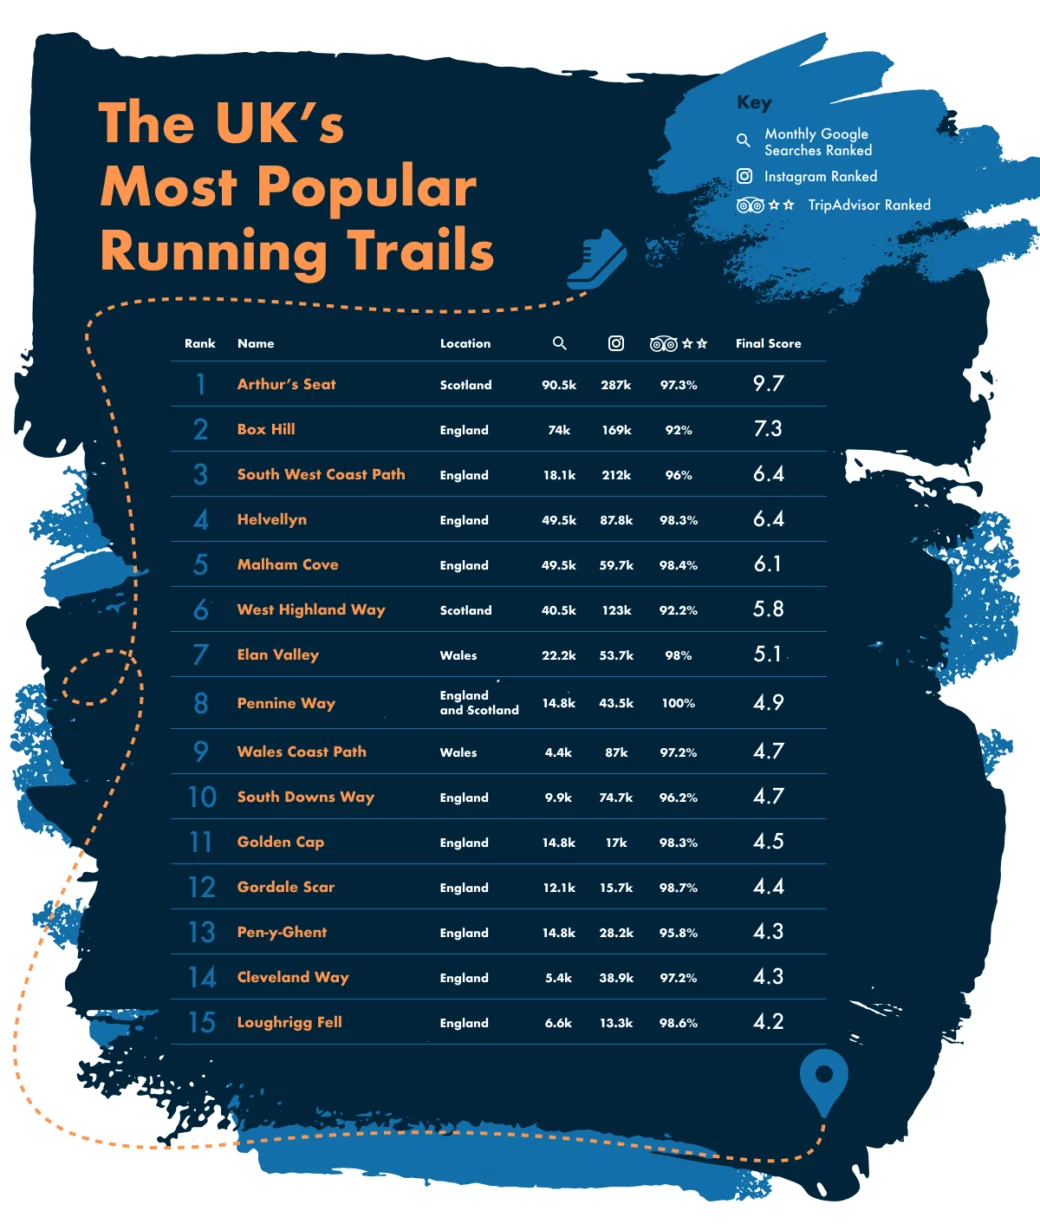 Top 15 running trails